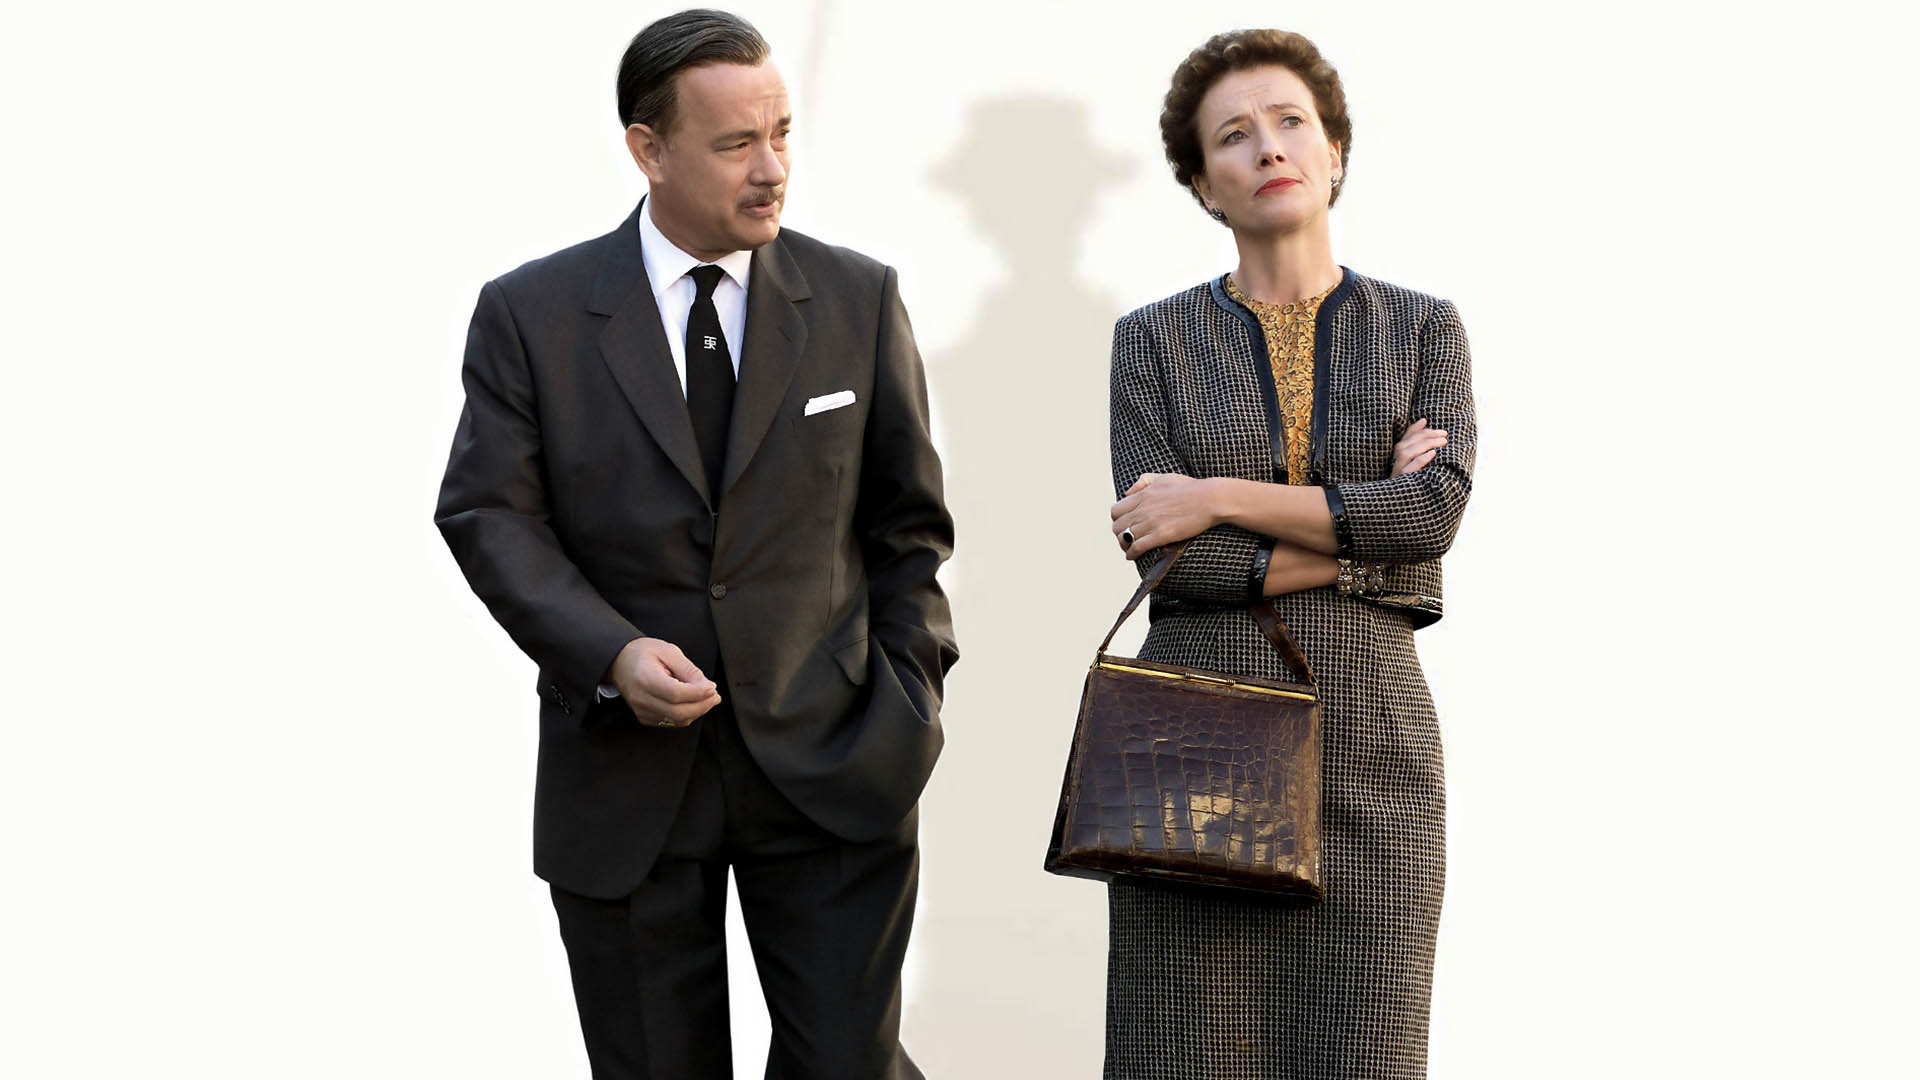 Emma Thomson and Tom Hanks in the poster of Saving Mr. Banks